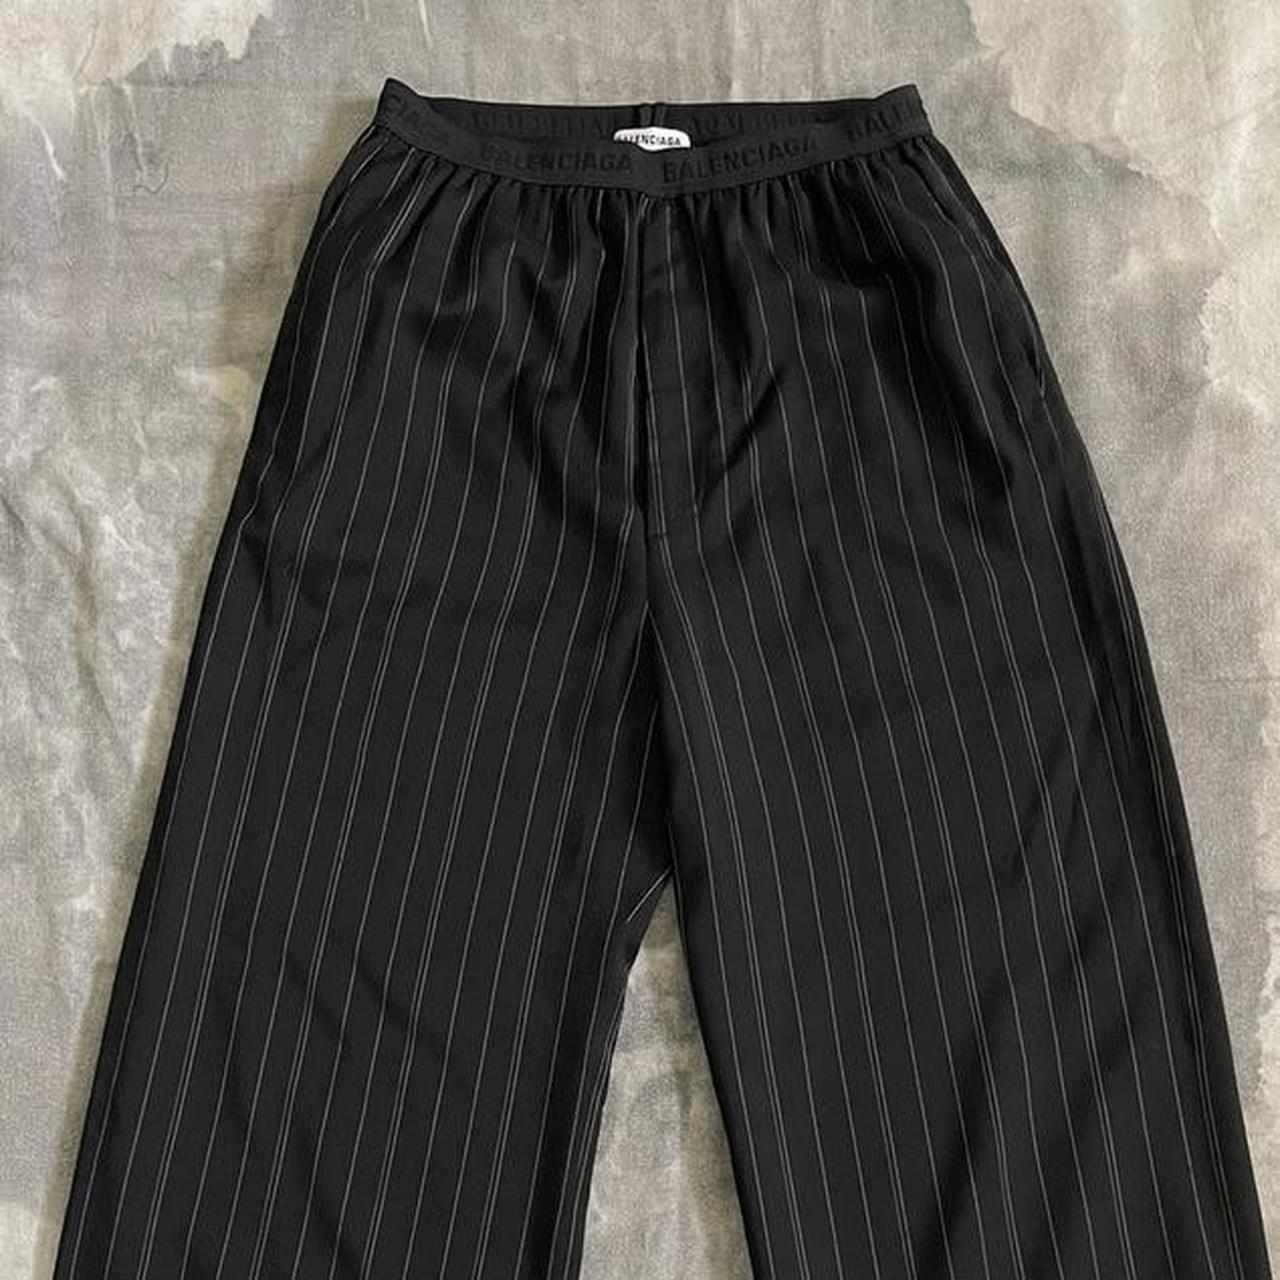 Men's Black and White Trousers | Depop